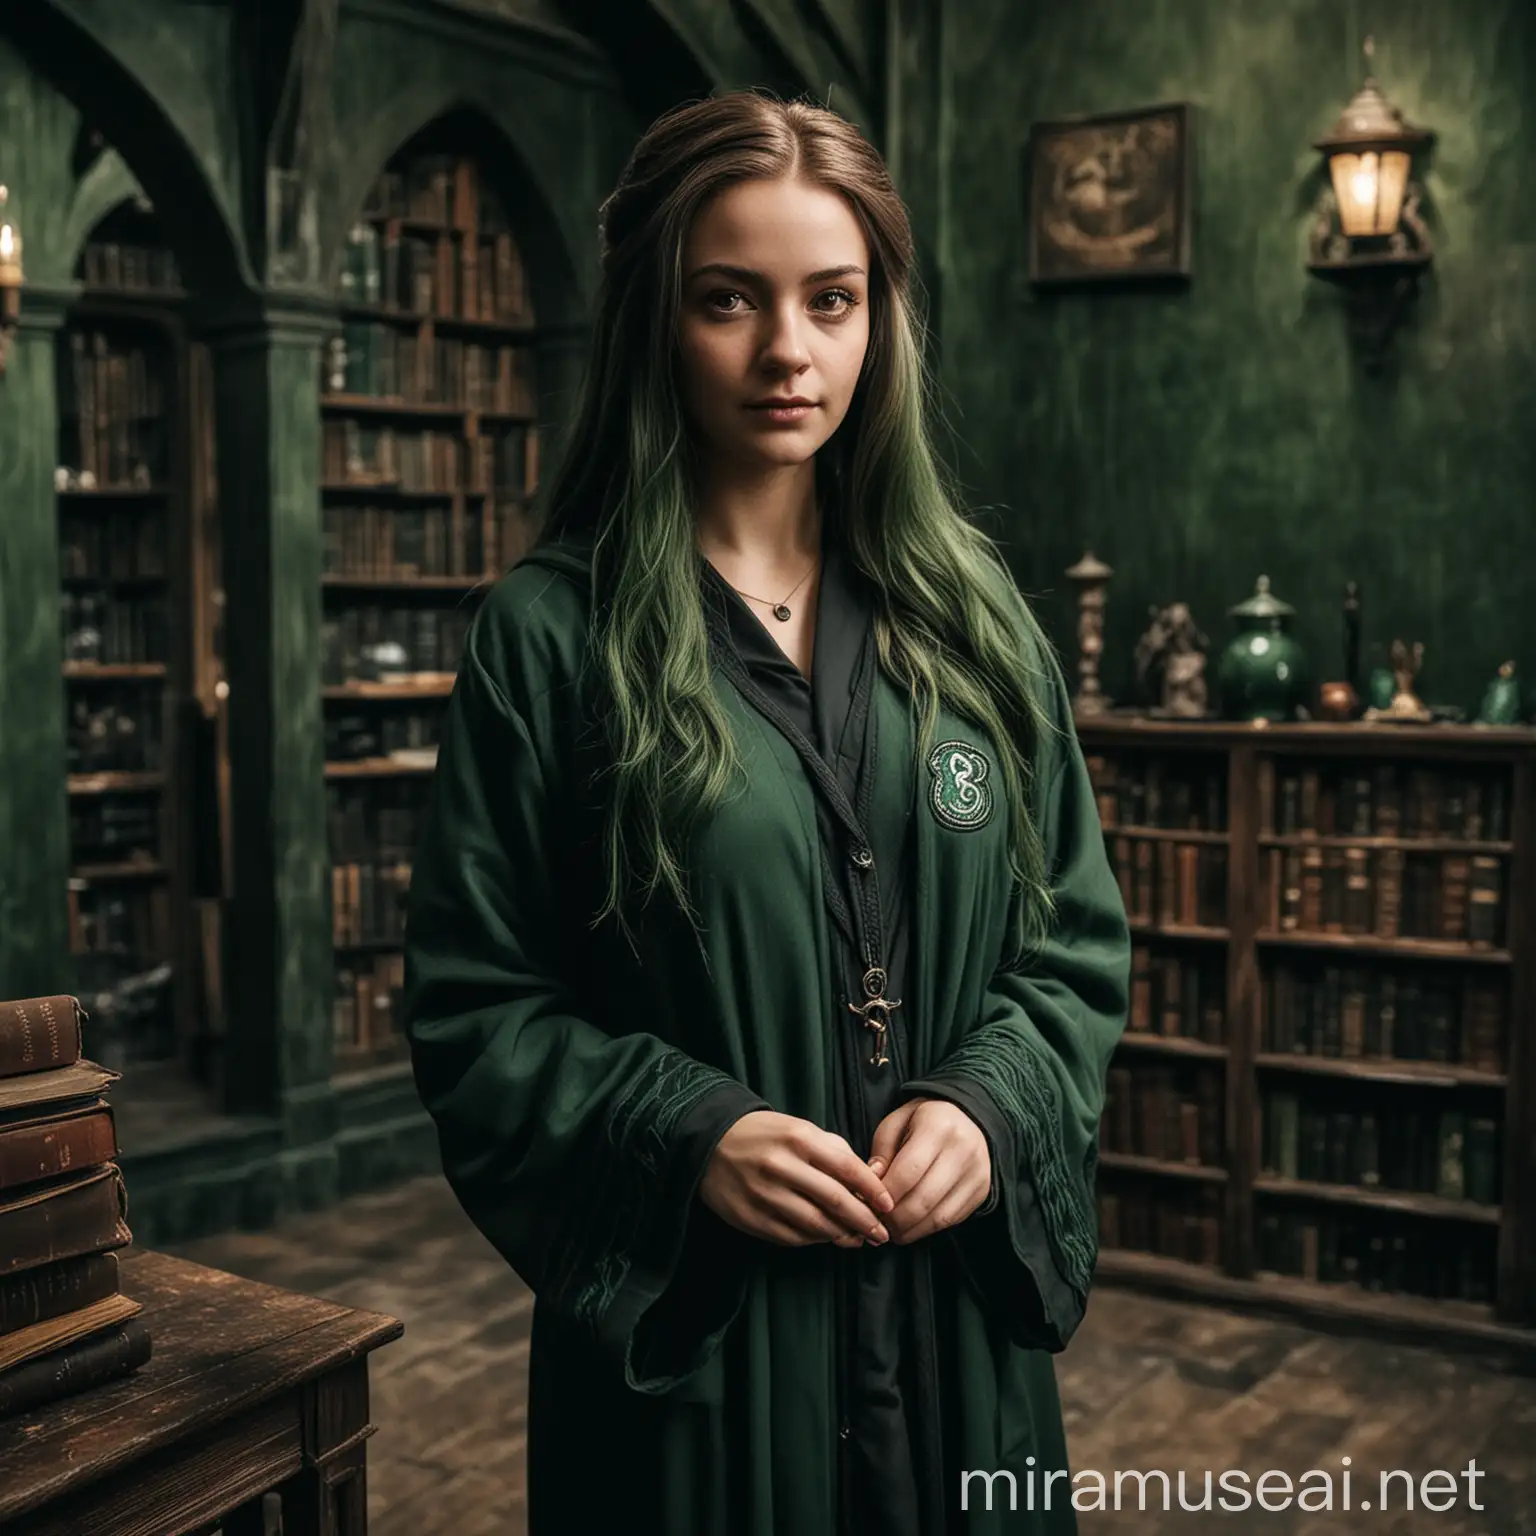 Slytherin House Student in the Common Room